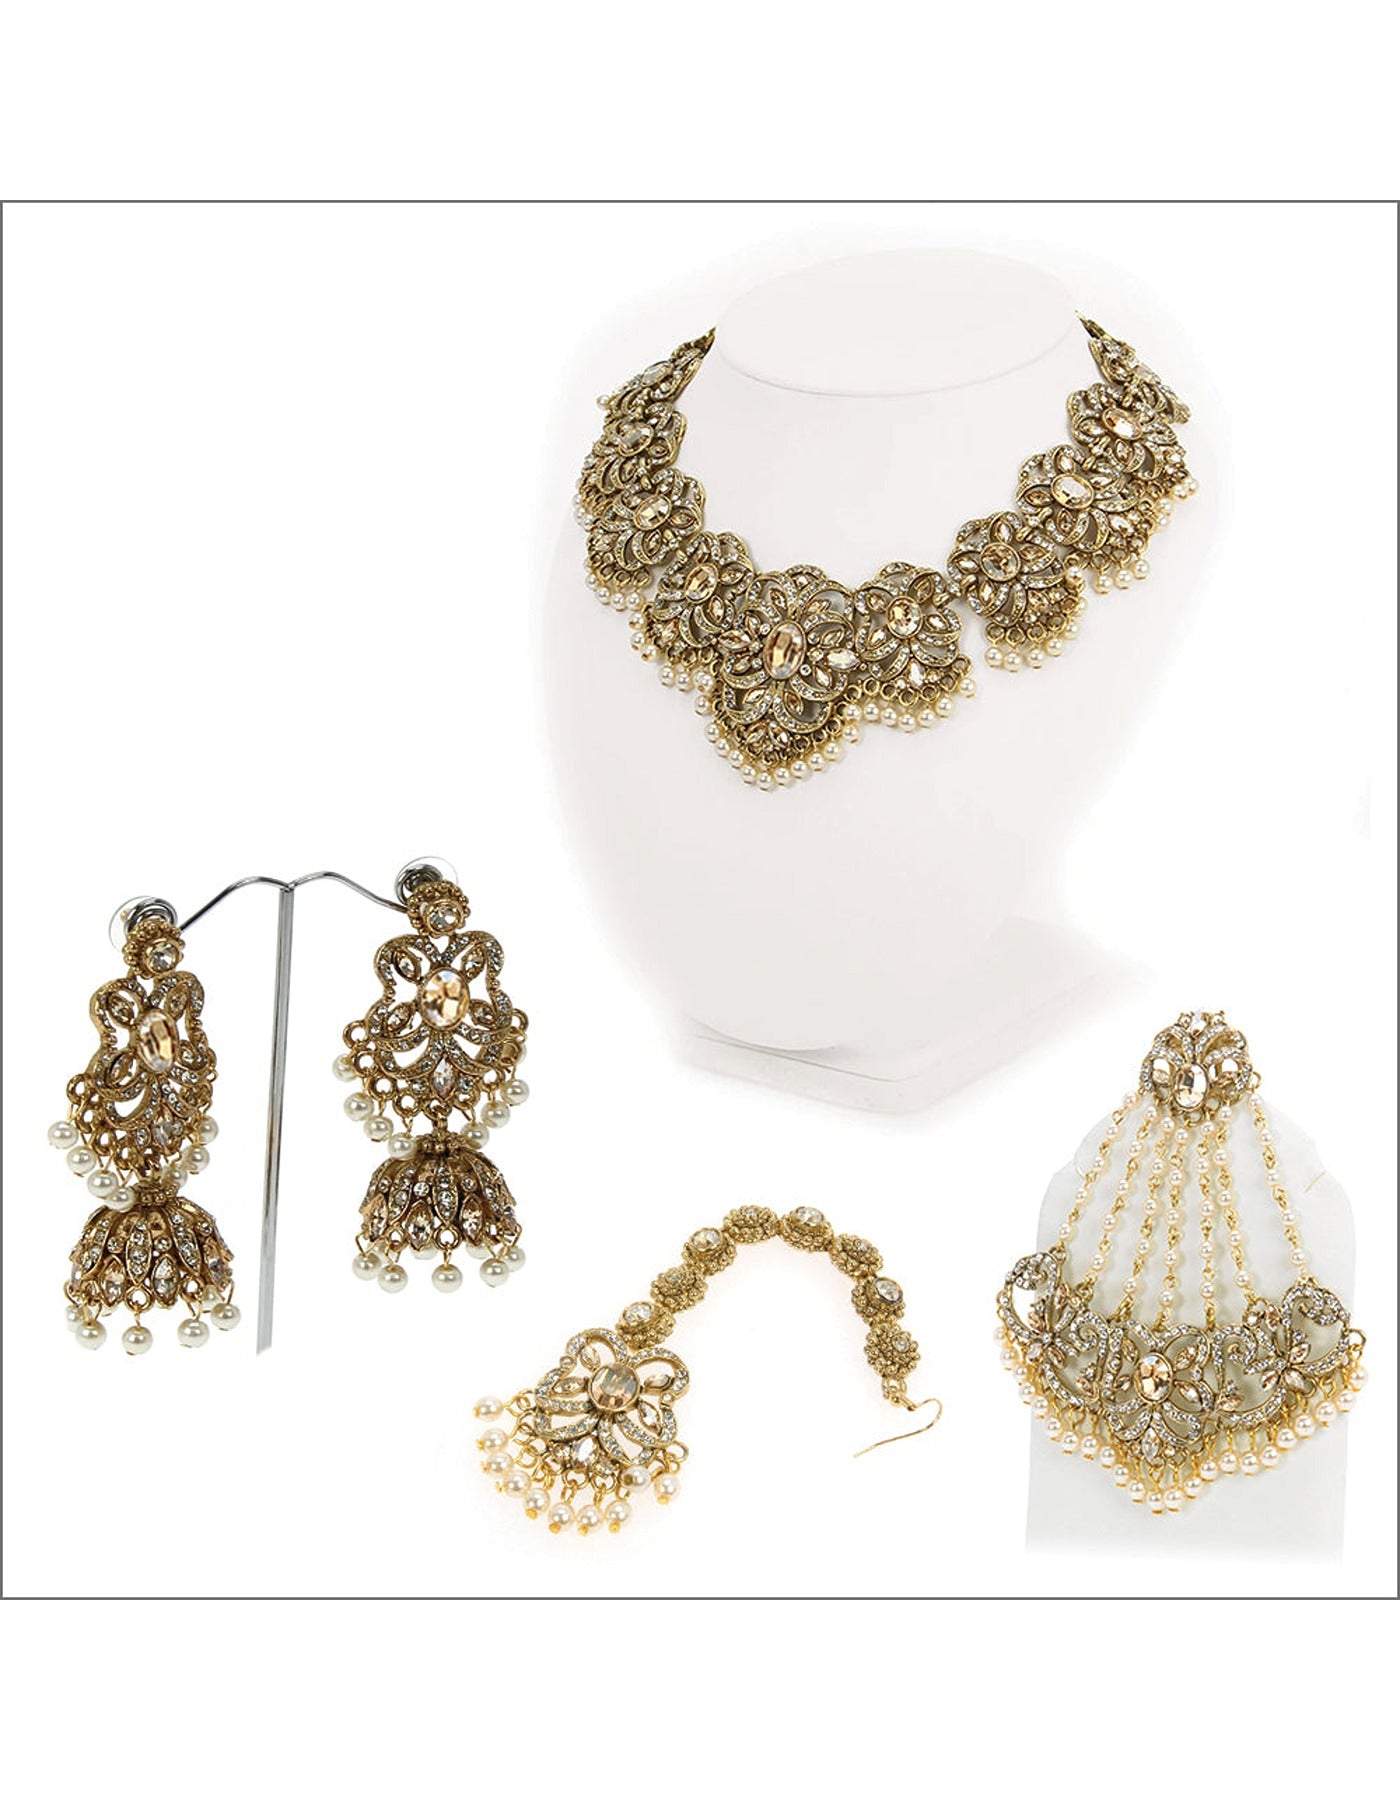 Antique Gold Jewelry with Crystal Golden Shadow and Crystal Accents